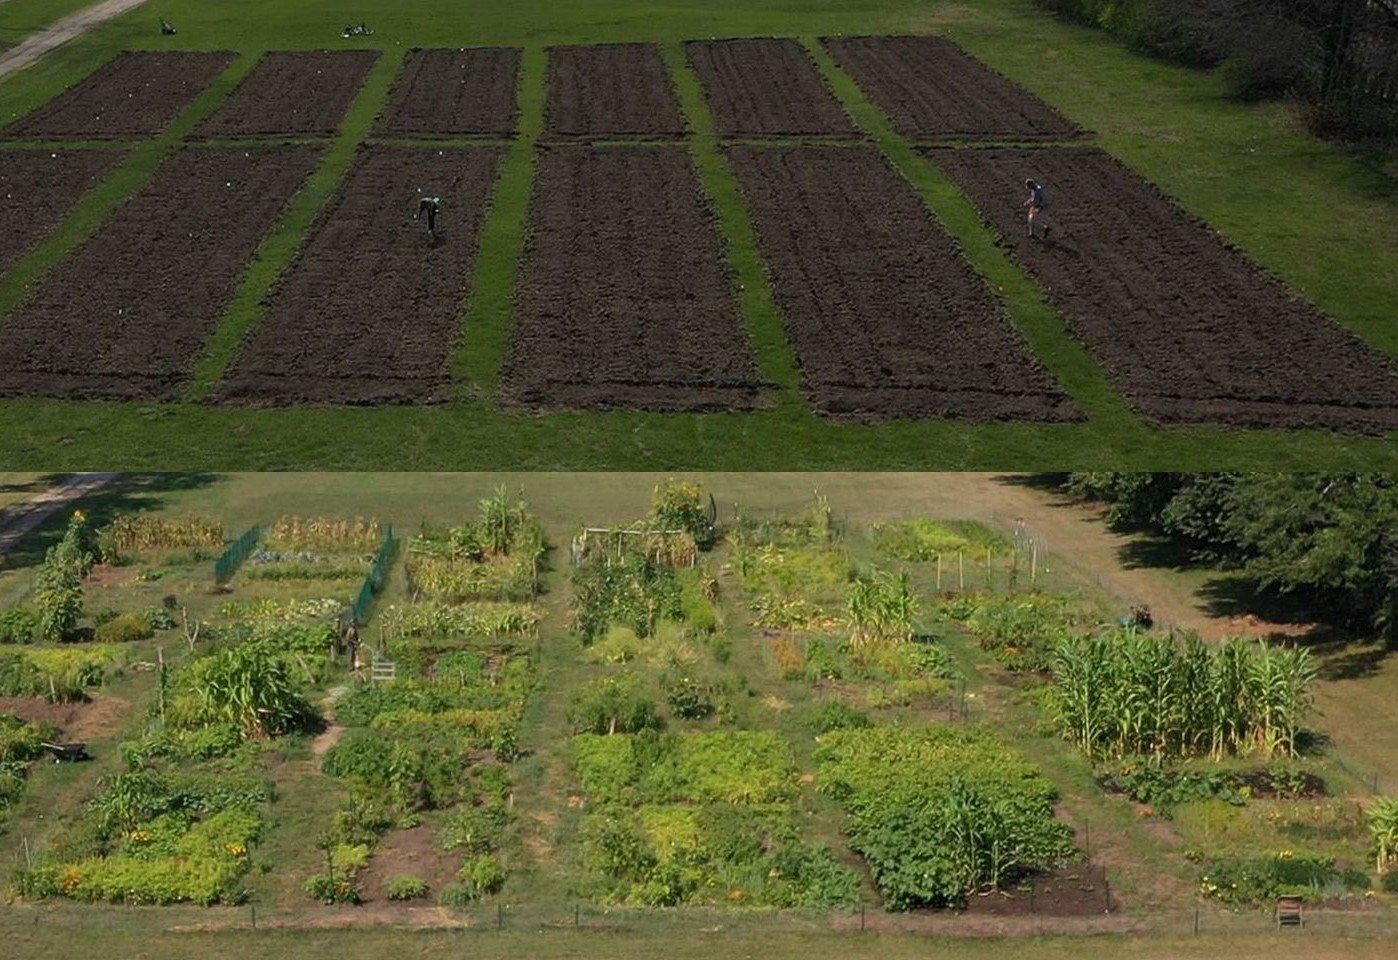 photo of the highland community garden plots freshly tilled in April and then fully grown in August